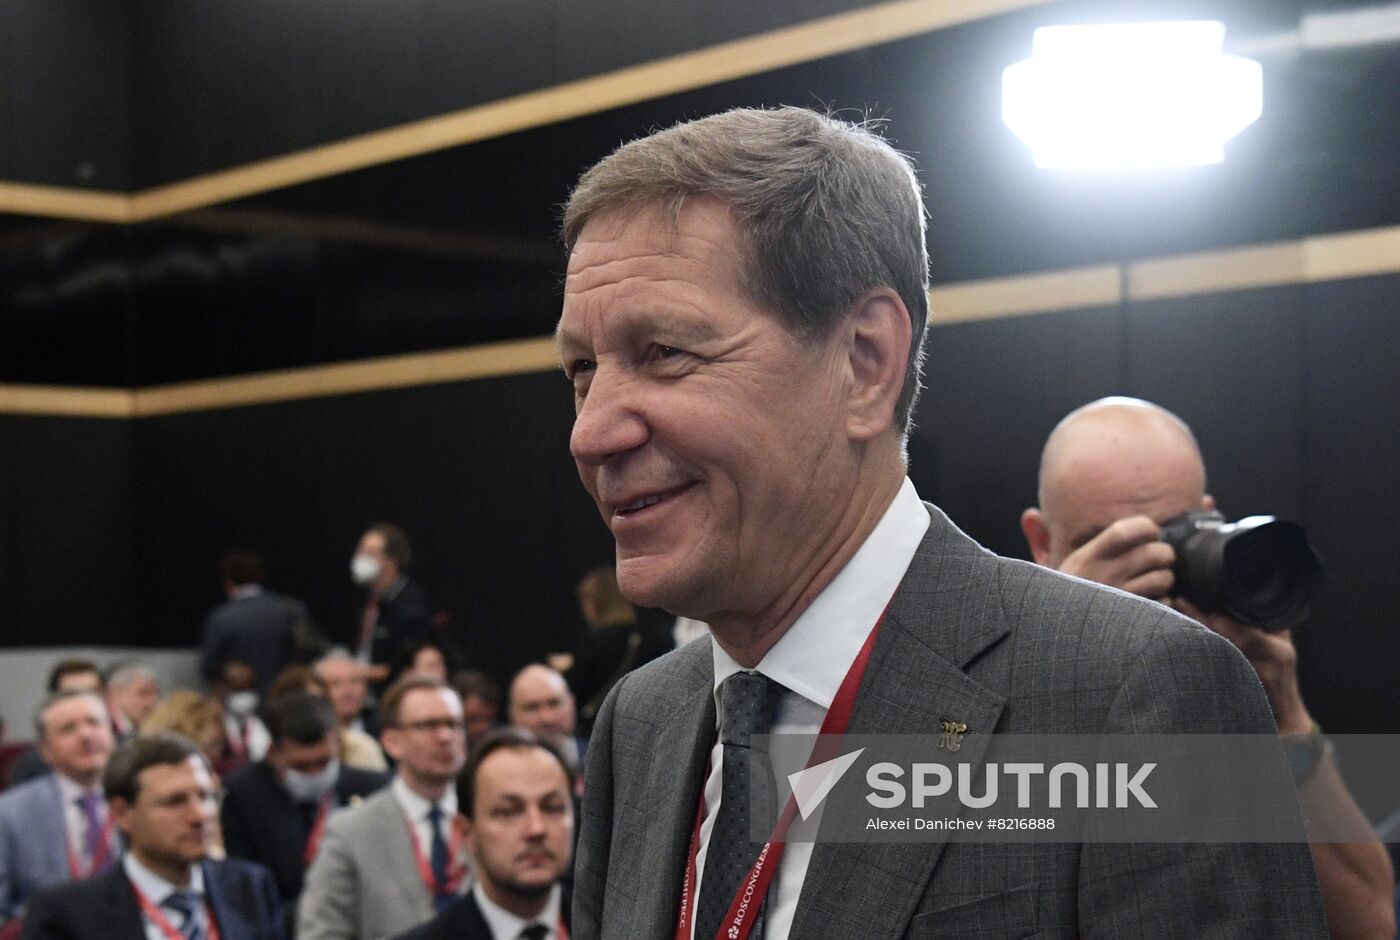 Russia SPIEF Session Economy Challenges